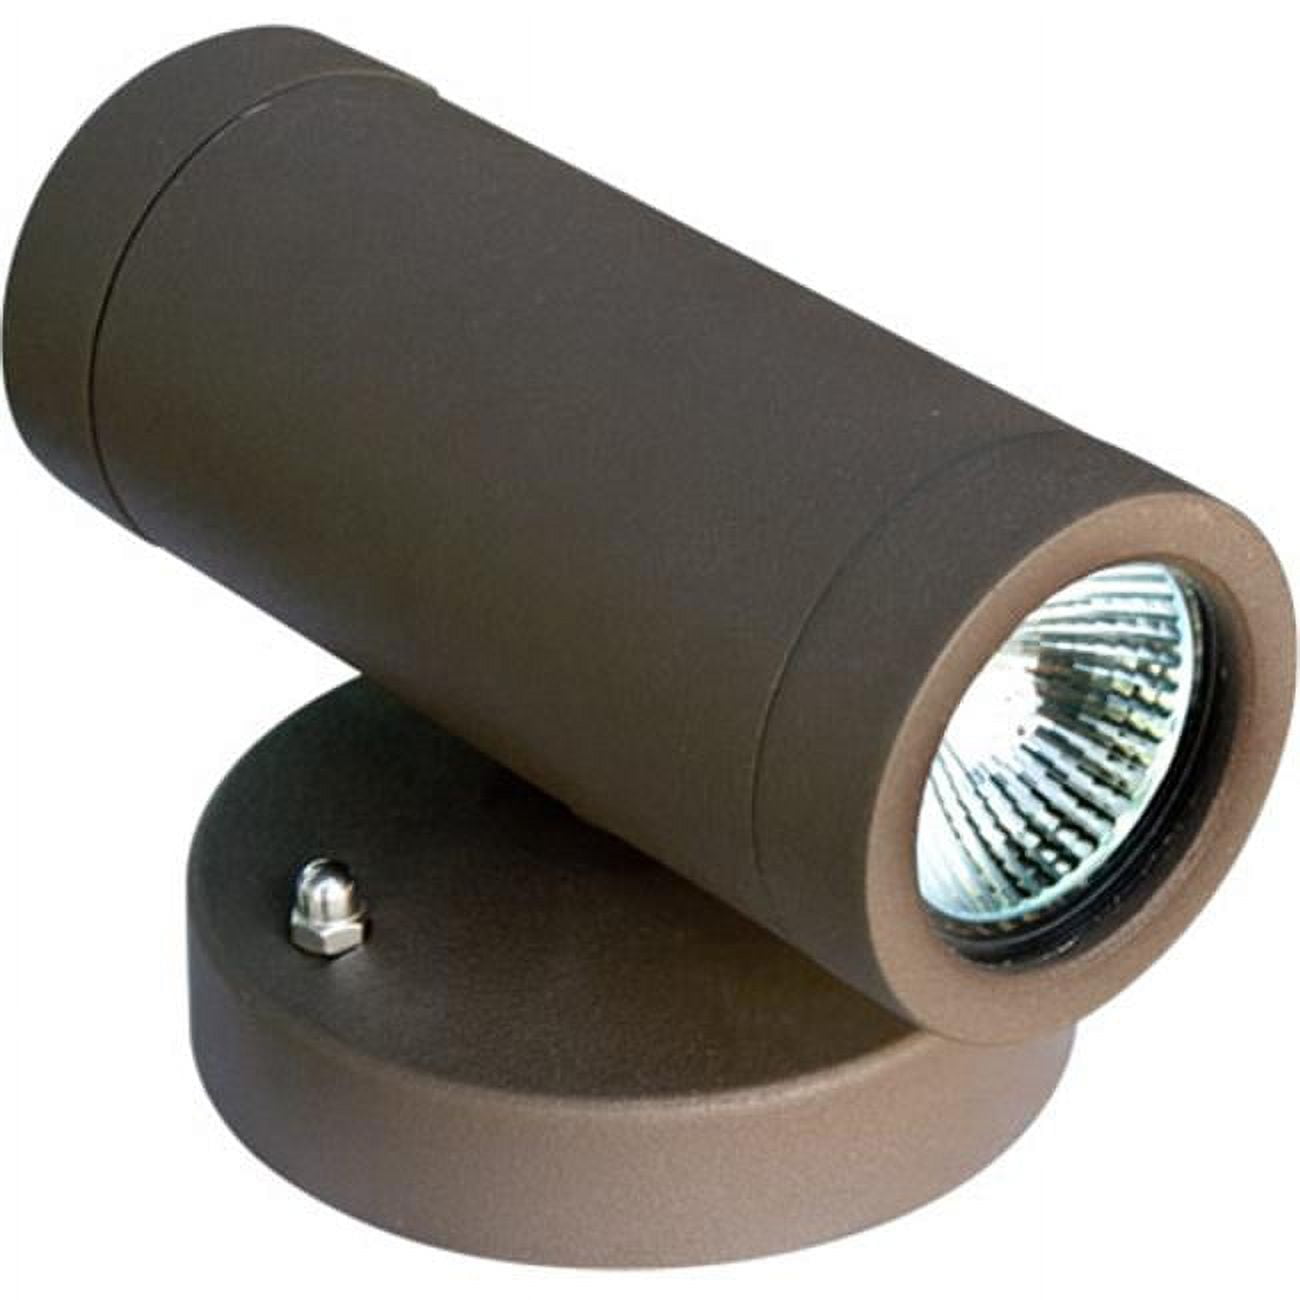 Picture of Dabmar Lighting LV49-BZ Cast Aluminum Surface Mount Up-Down, Brick, Step, Wall & Deck Light, Bronze - 5.44 x 4 x 4 in.